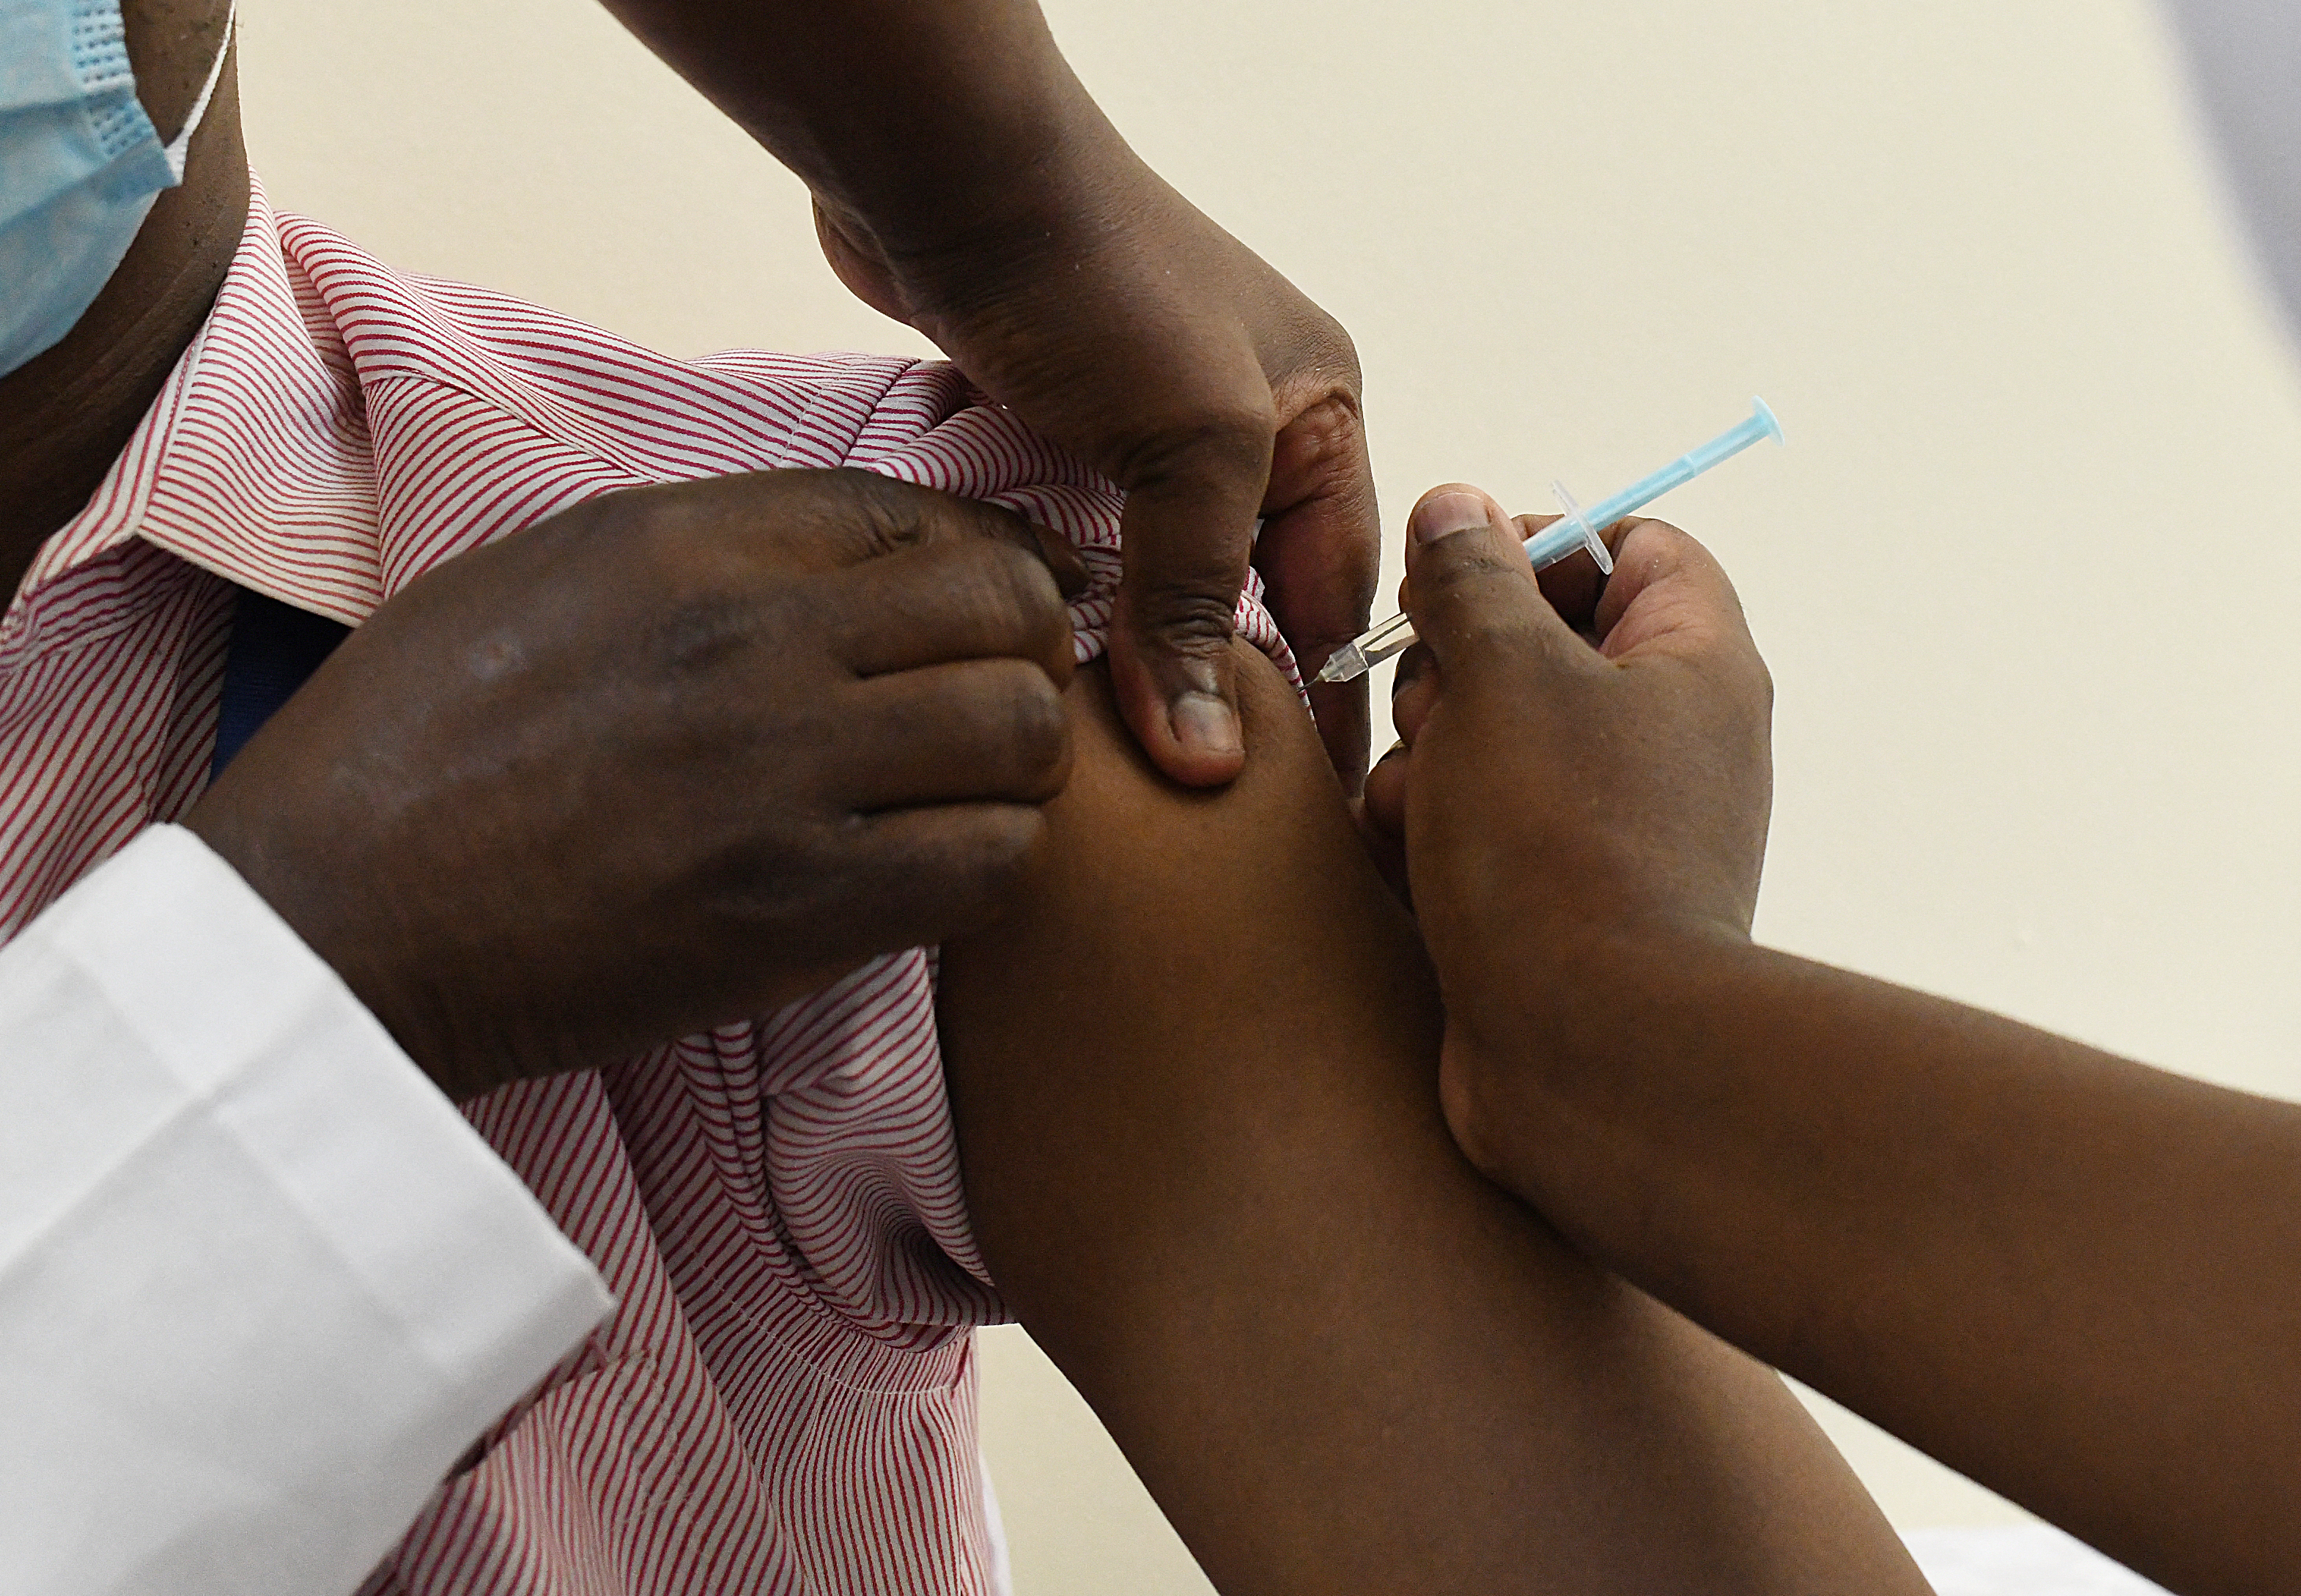 Shoulder of an African person being injected wih a vaccine